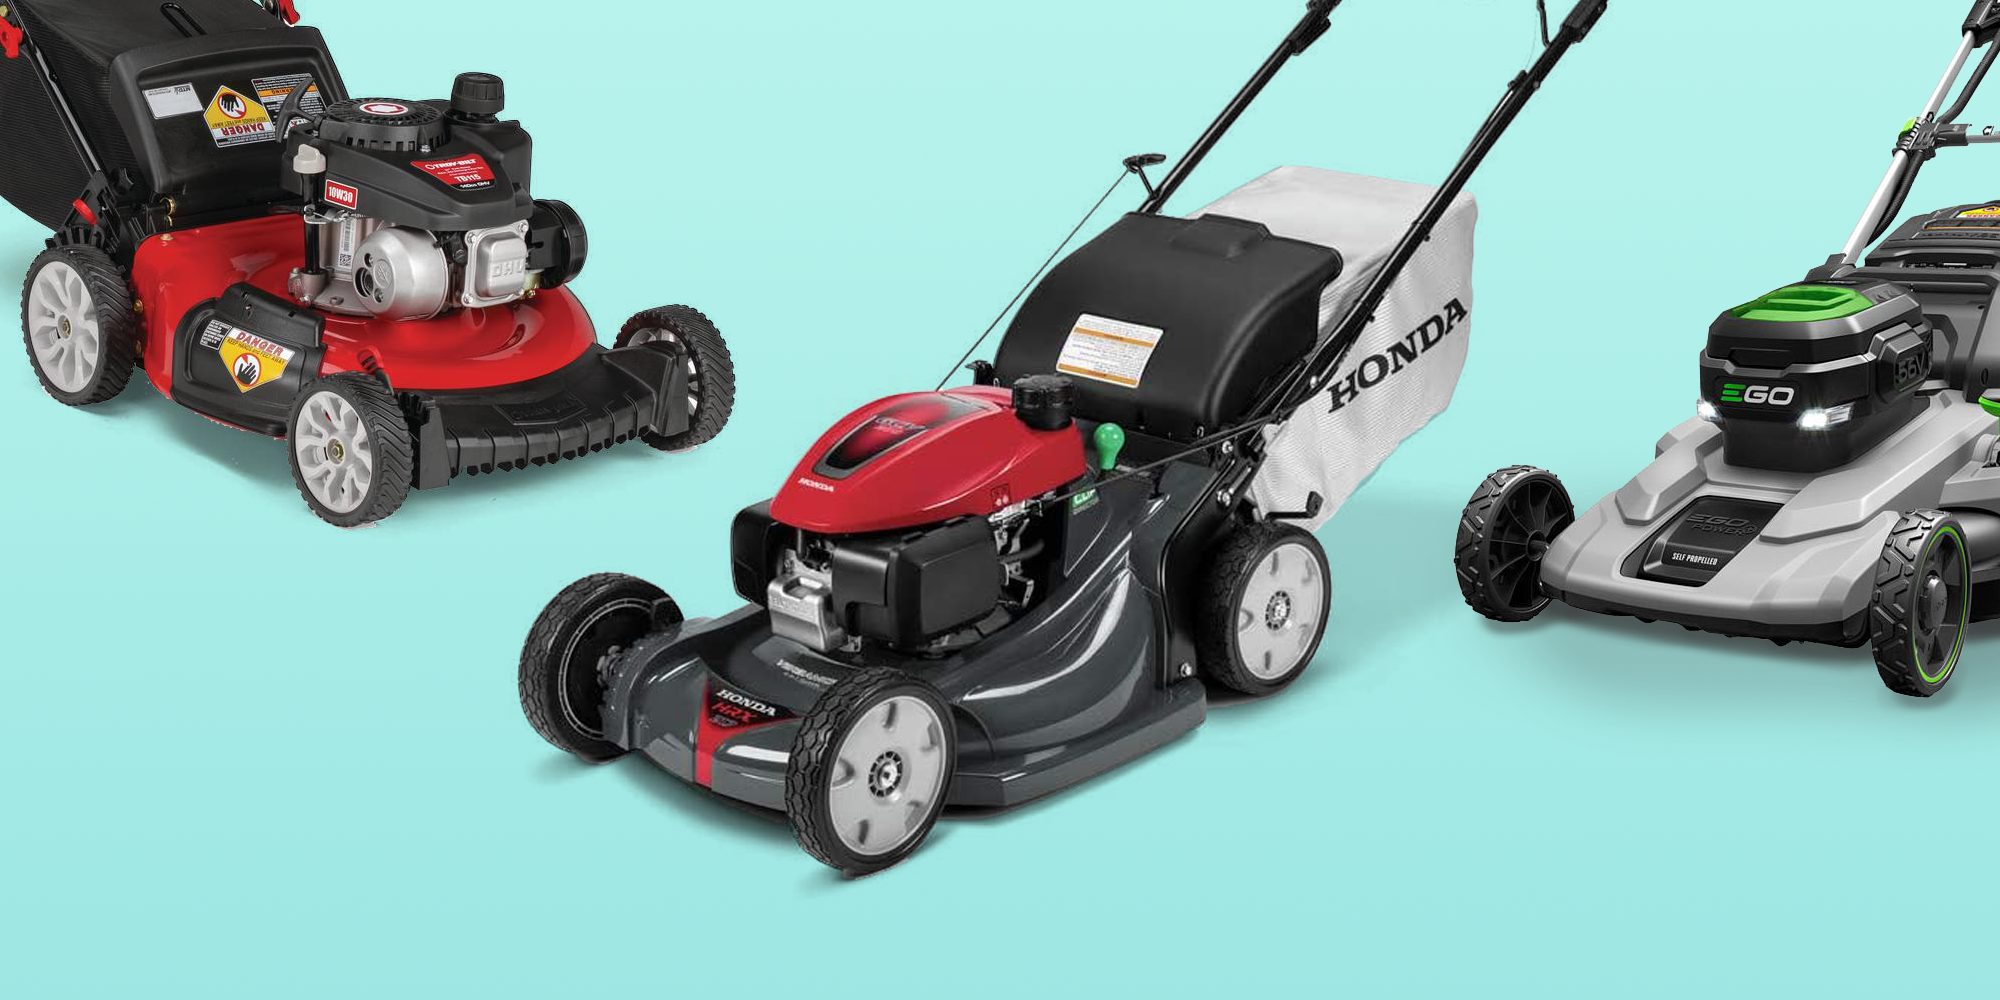 Lawn Mower Price Cheap Sale, UP TO 69% OFF | www.progres.es